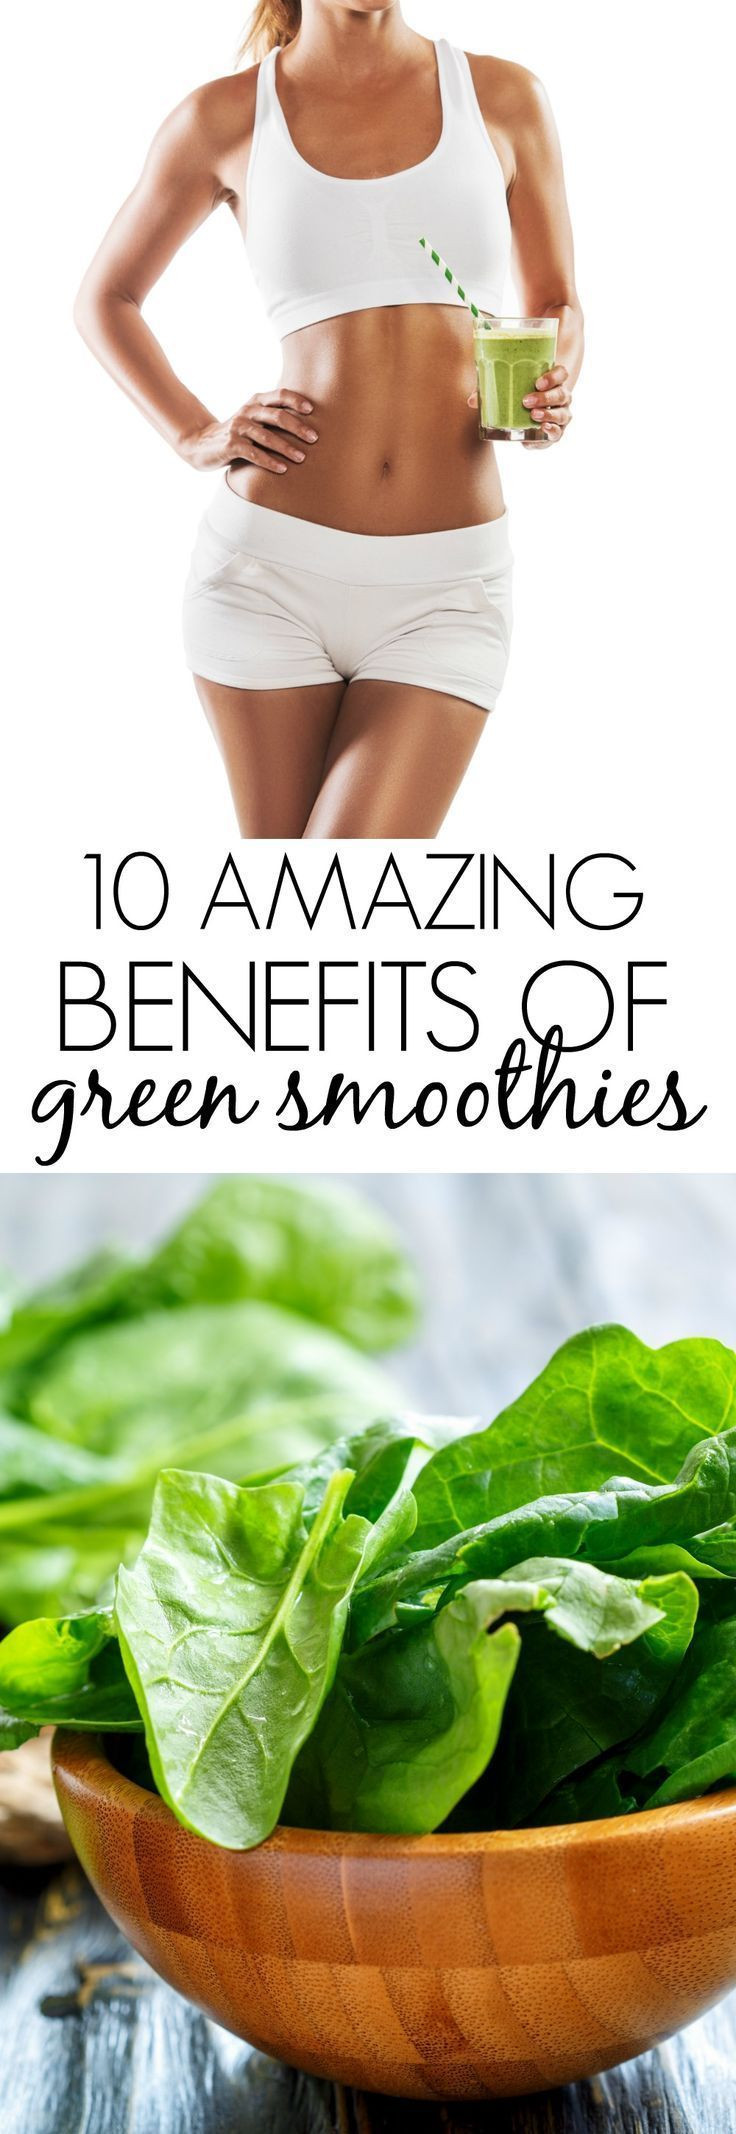 Benefits Of Green Smoothies For Weight Loss
 10 Health Benefits of Green Smoothies